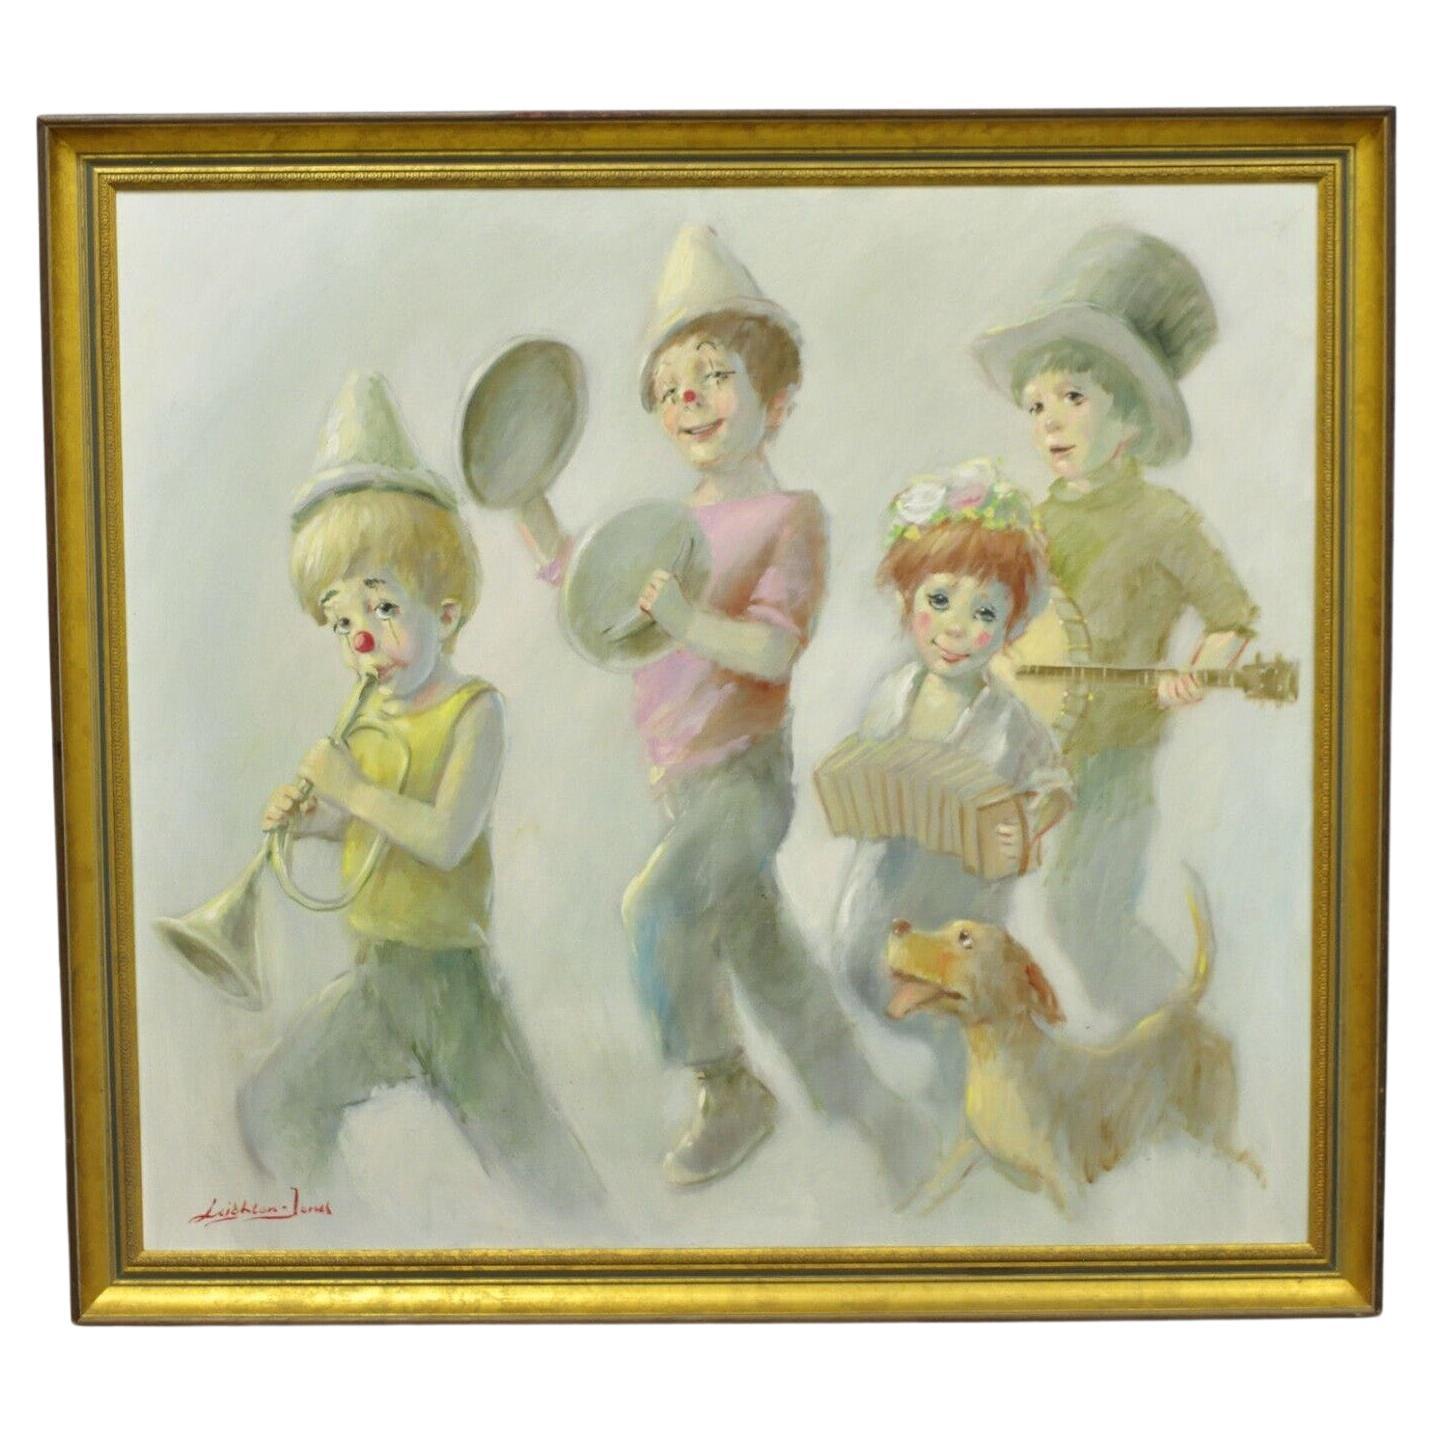 Barry Leighton Jones Large Oil on Canvas Painting Children Clown "The Minstrels" For Sale